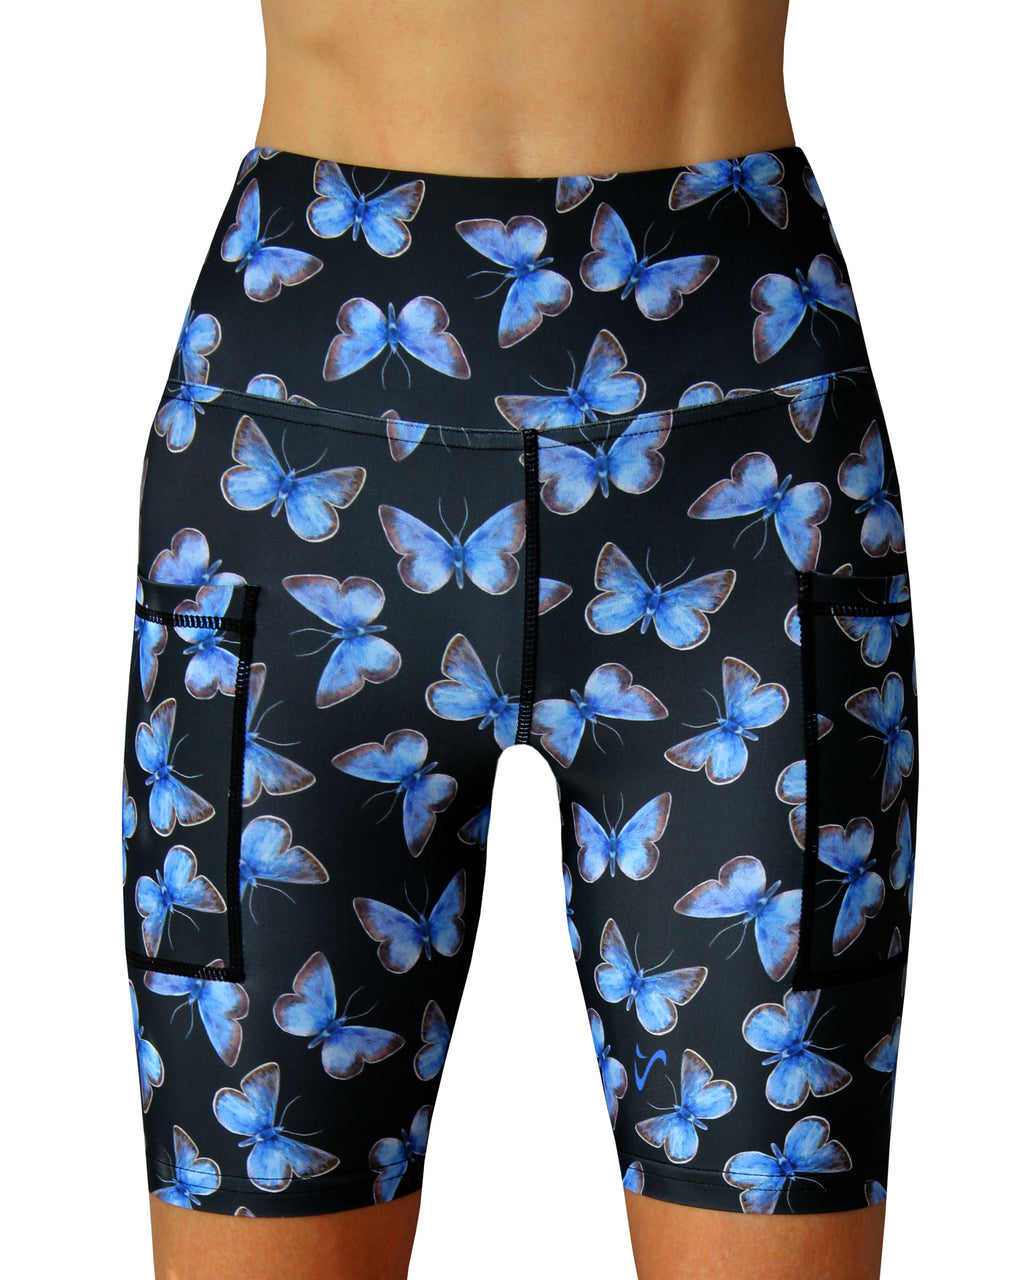 Funky pants with blue butterflies. The perfect shorts for running and gym. Made in Cape Town.